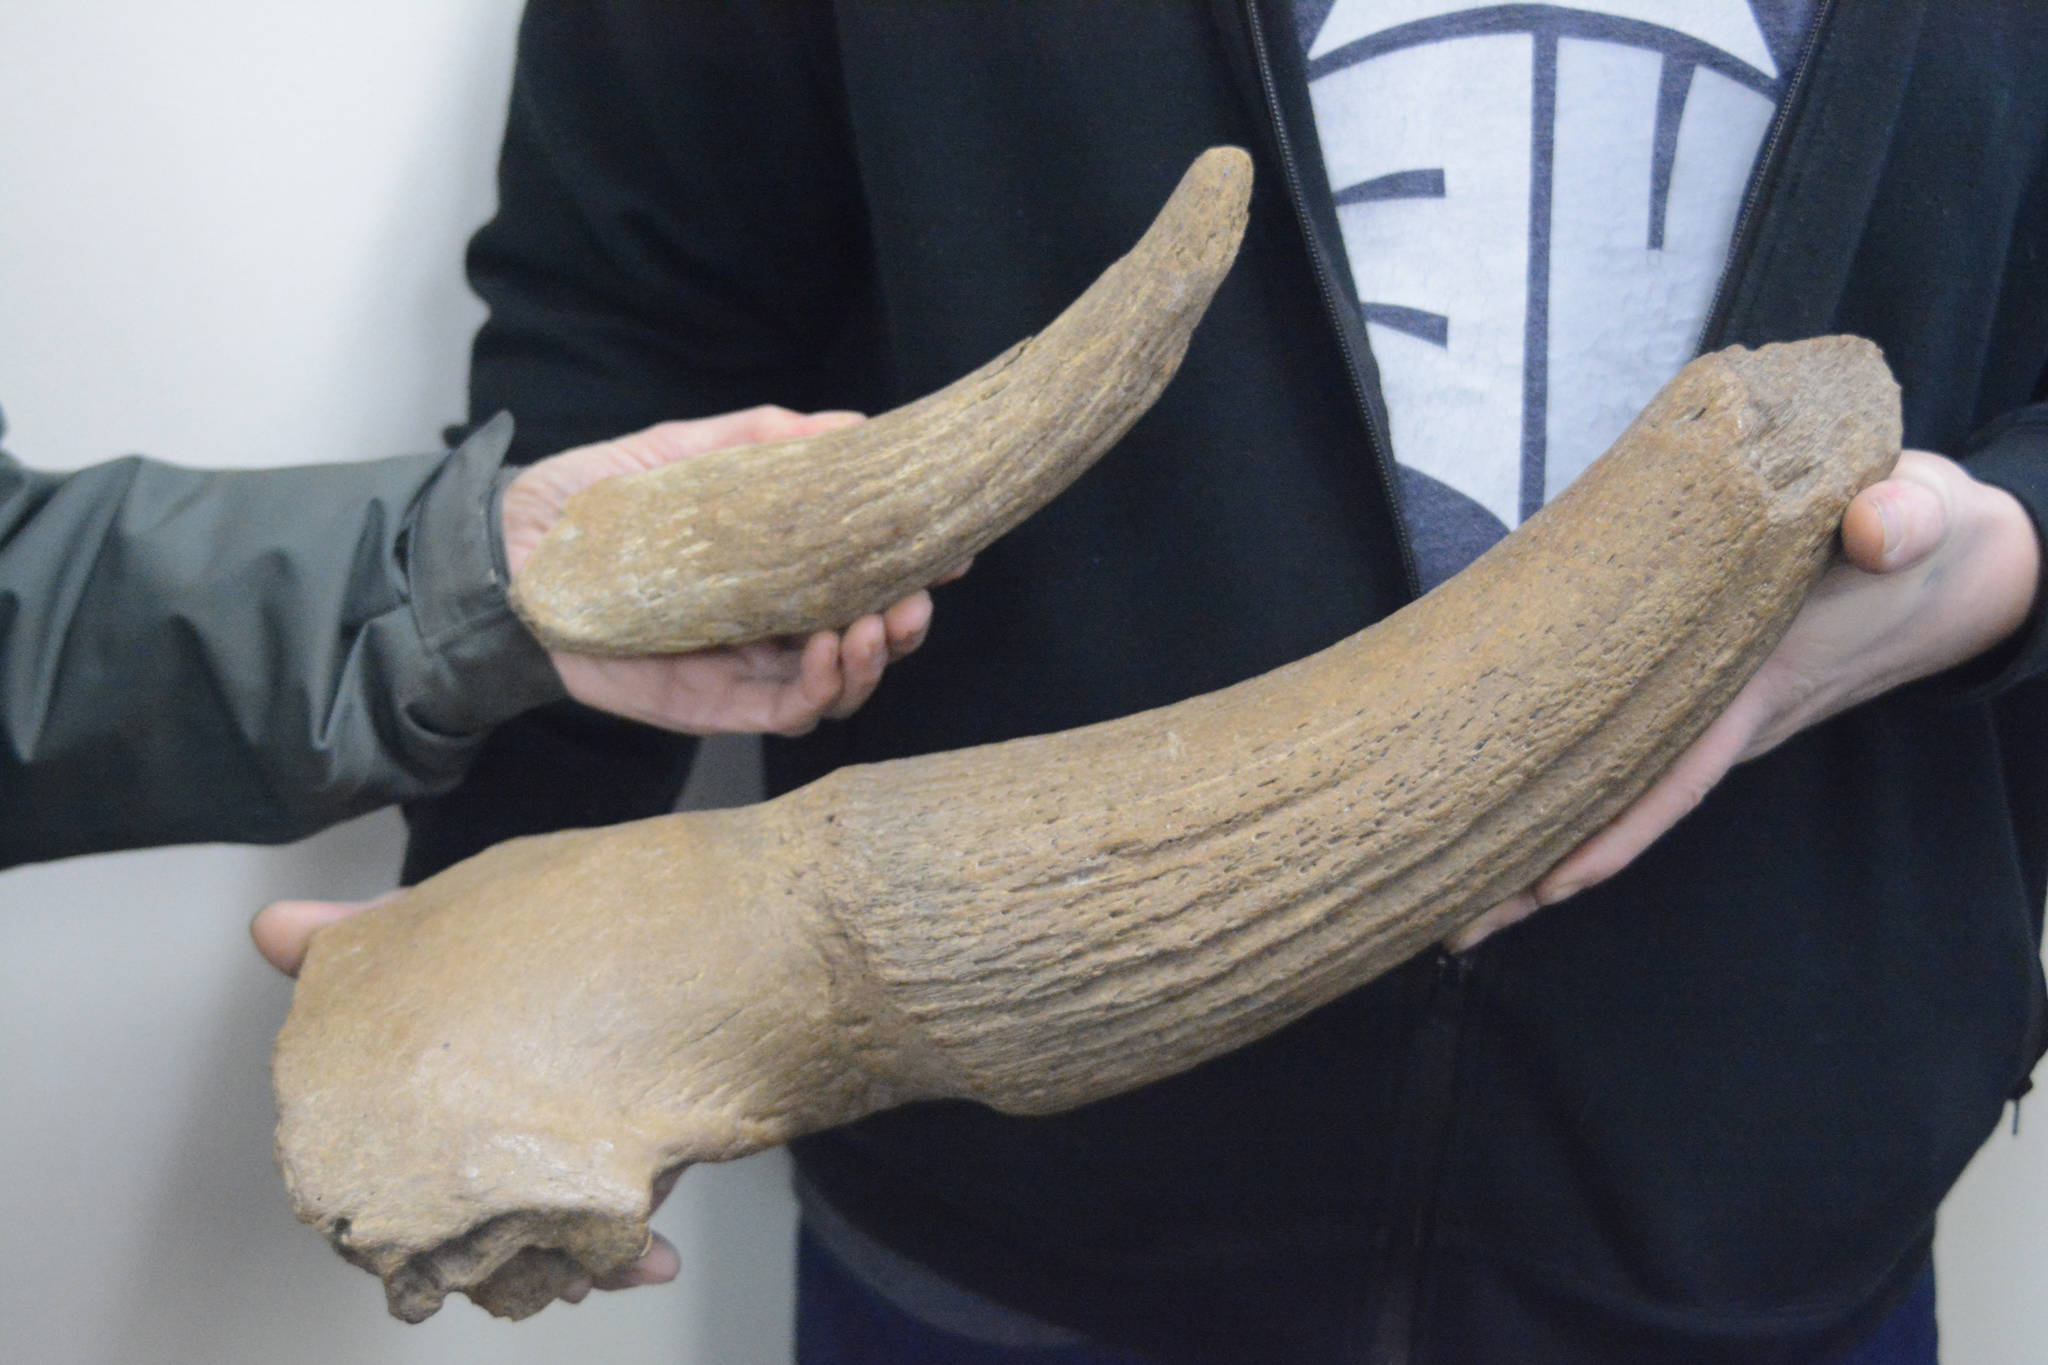 In this photo taken on Nov. 26, 2018, Janet Klein, left, and A.J. Weber, right, compare steppe bison core horns found near Diamond Creek in Homer, Alaska. The smaller horn was found recently by a person who asked to be anonymous. Weber found his in 2012 while gold panning at the creek. (Photo by Michael Armstrong/Homer News)